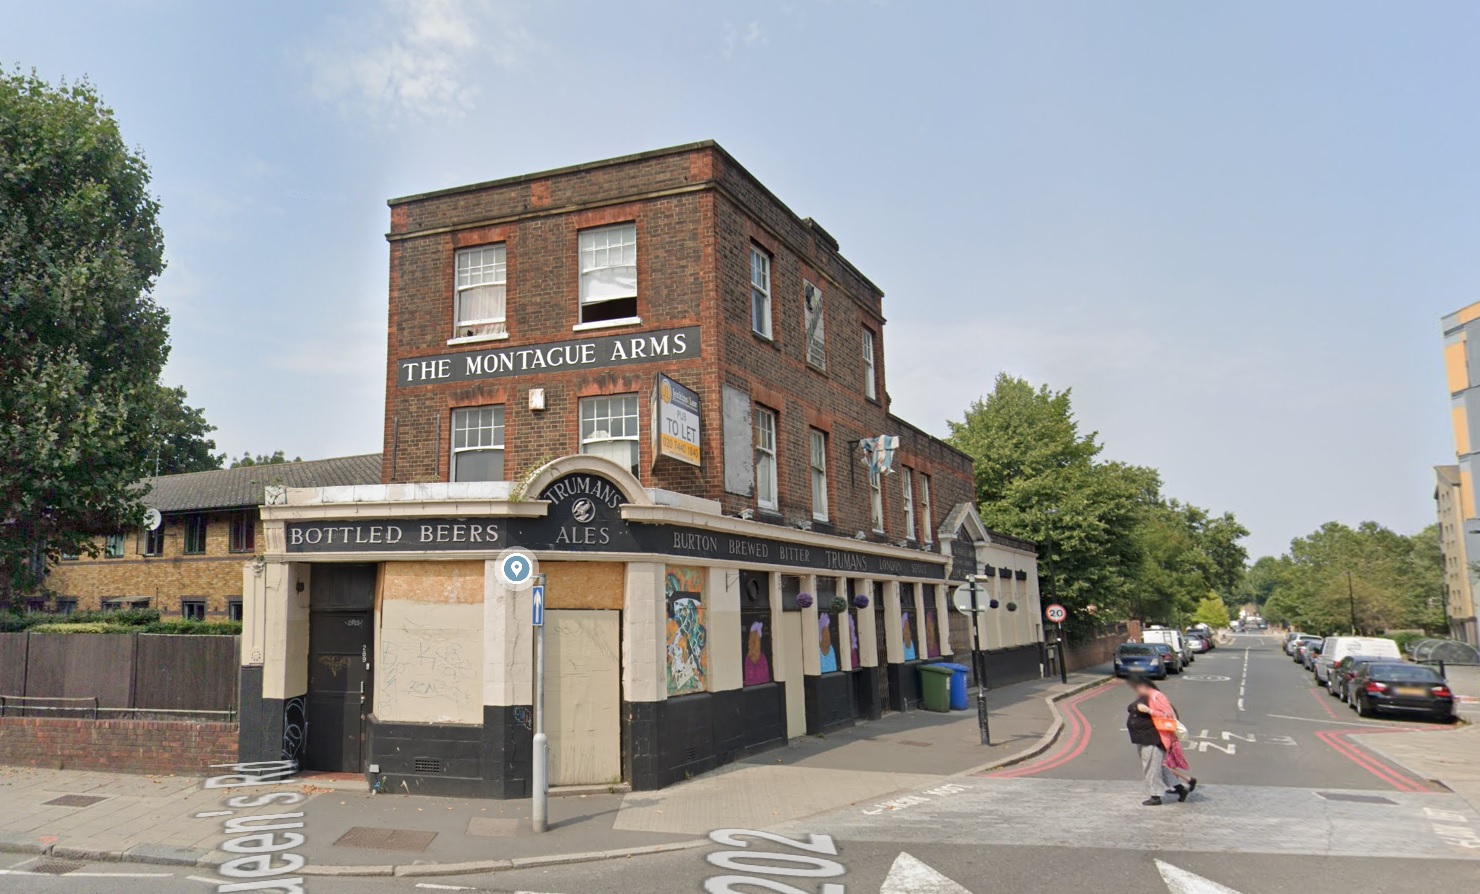 Montague Arms pub demolition plan in New Cross withdrawn - Murky Depths